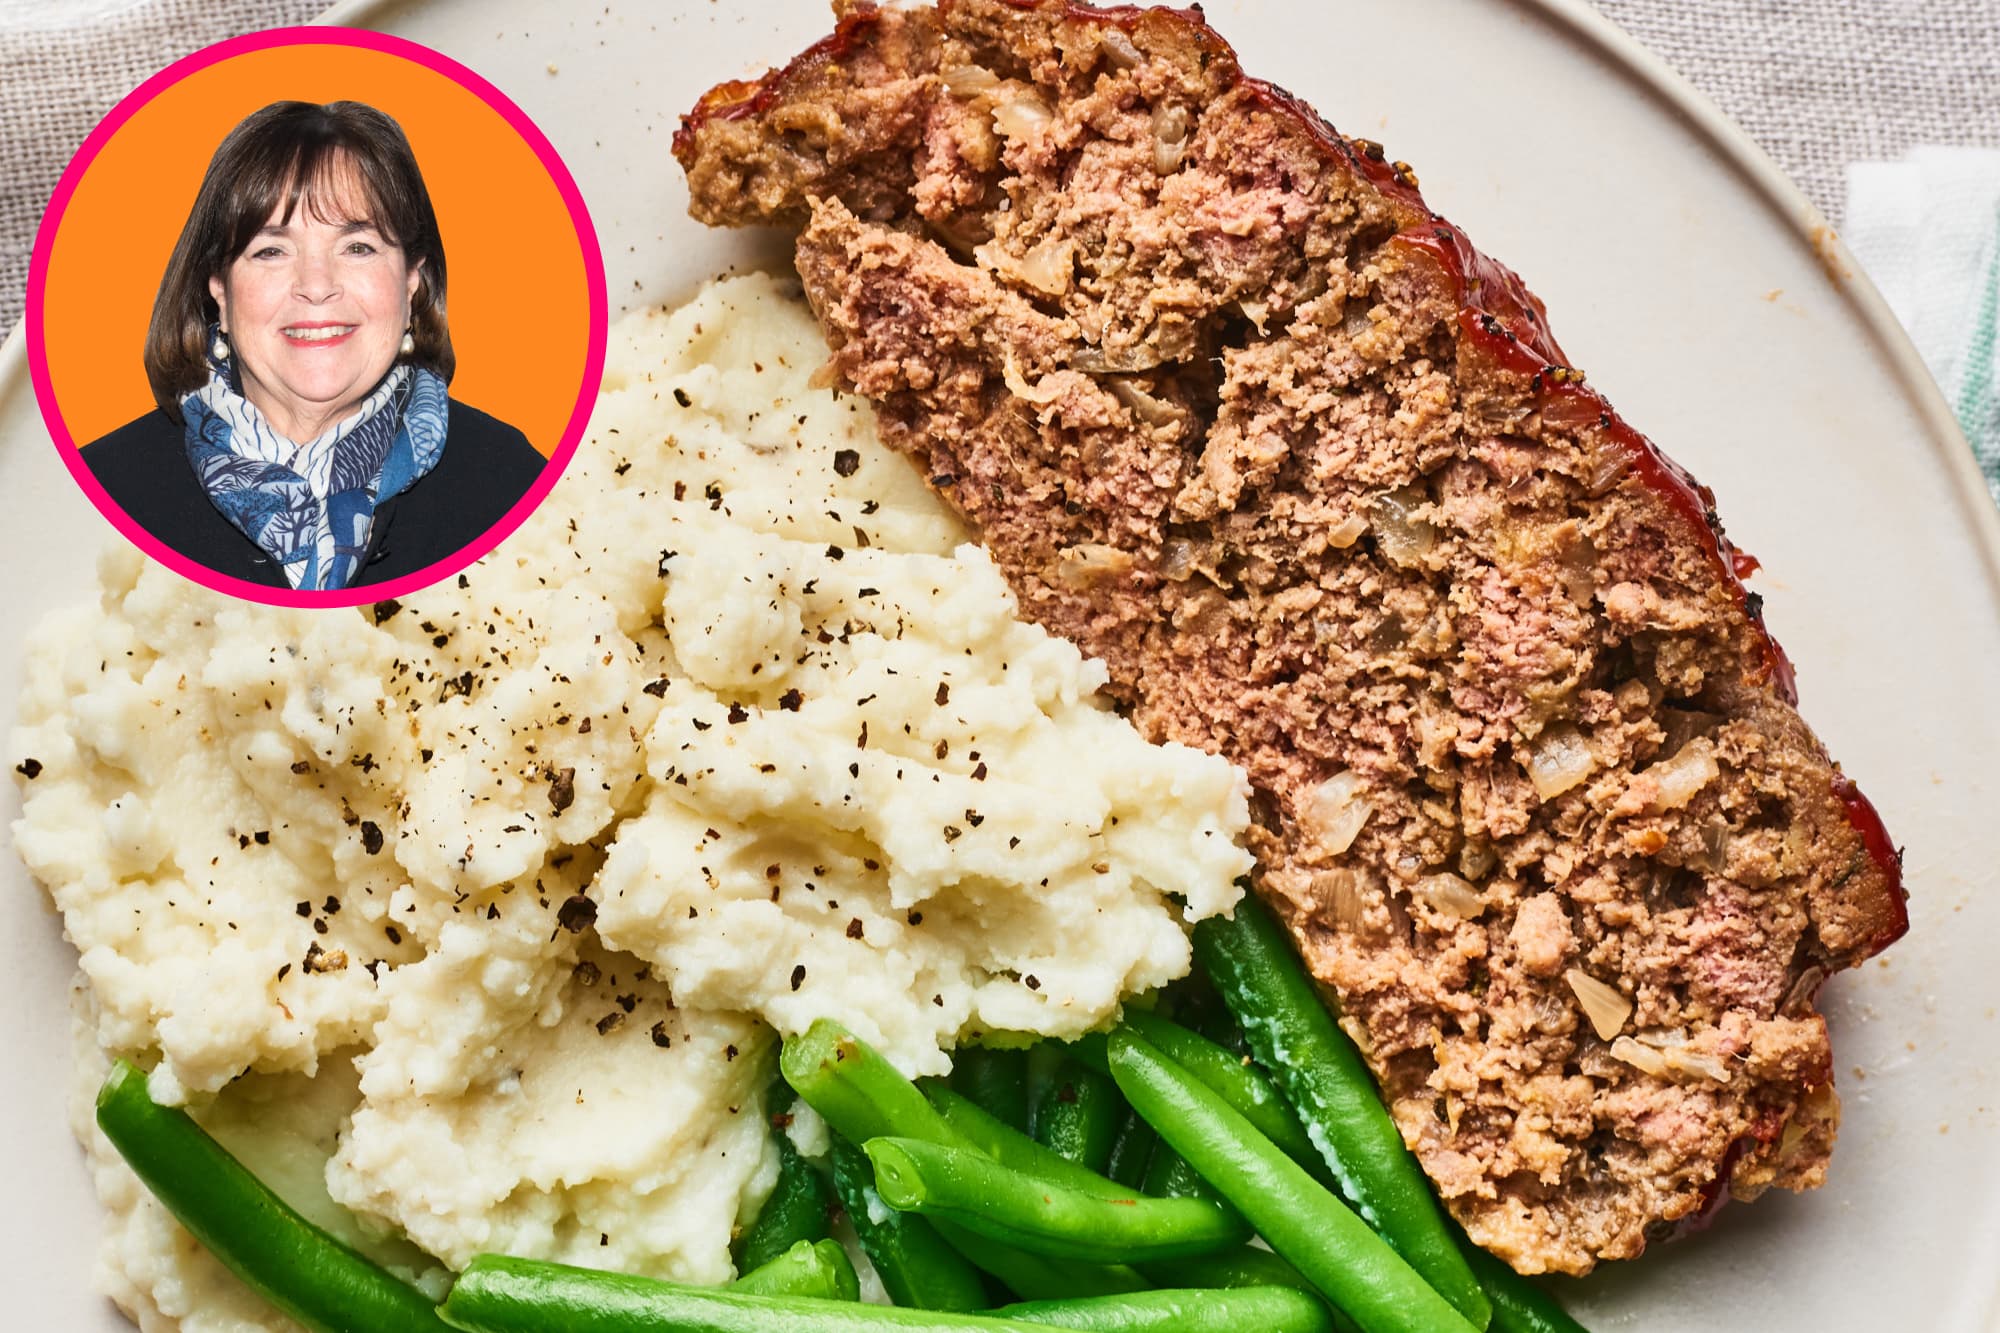 Here's Our Review Of Ina Garten's Meatloaf Recipe | Kitchn